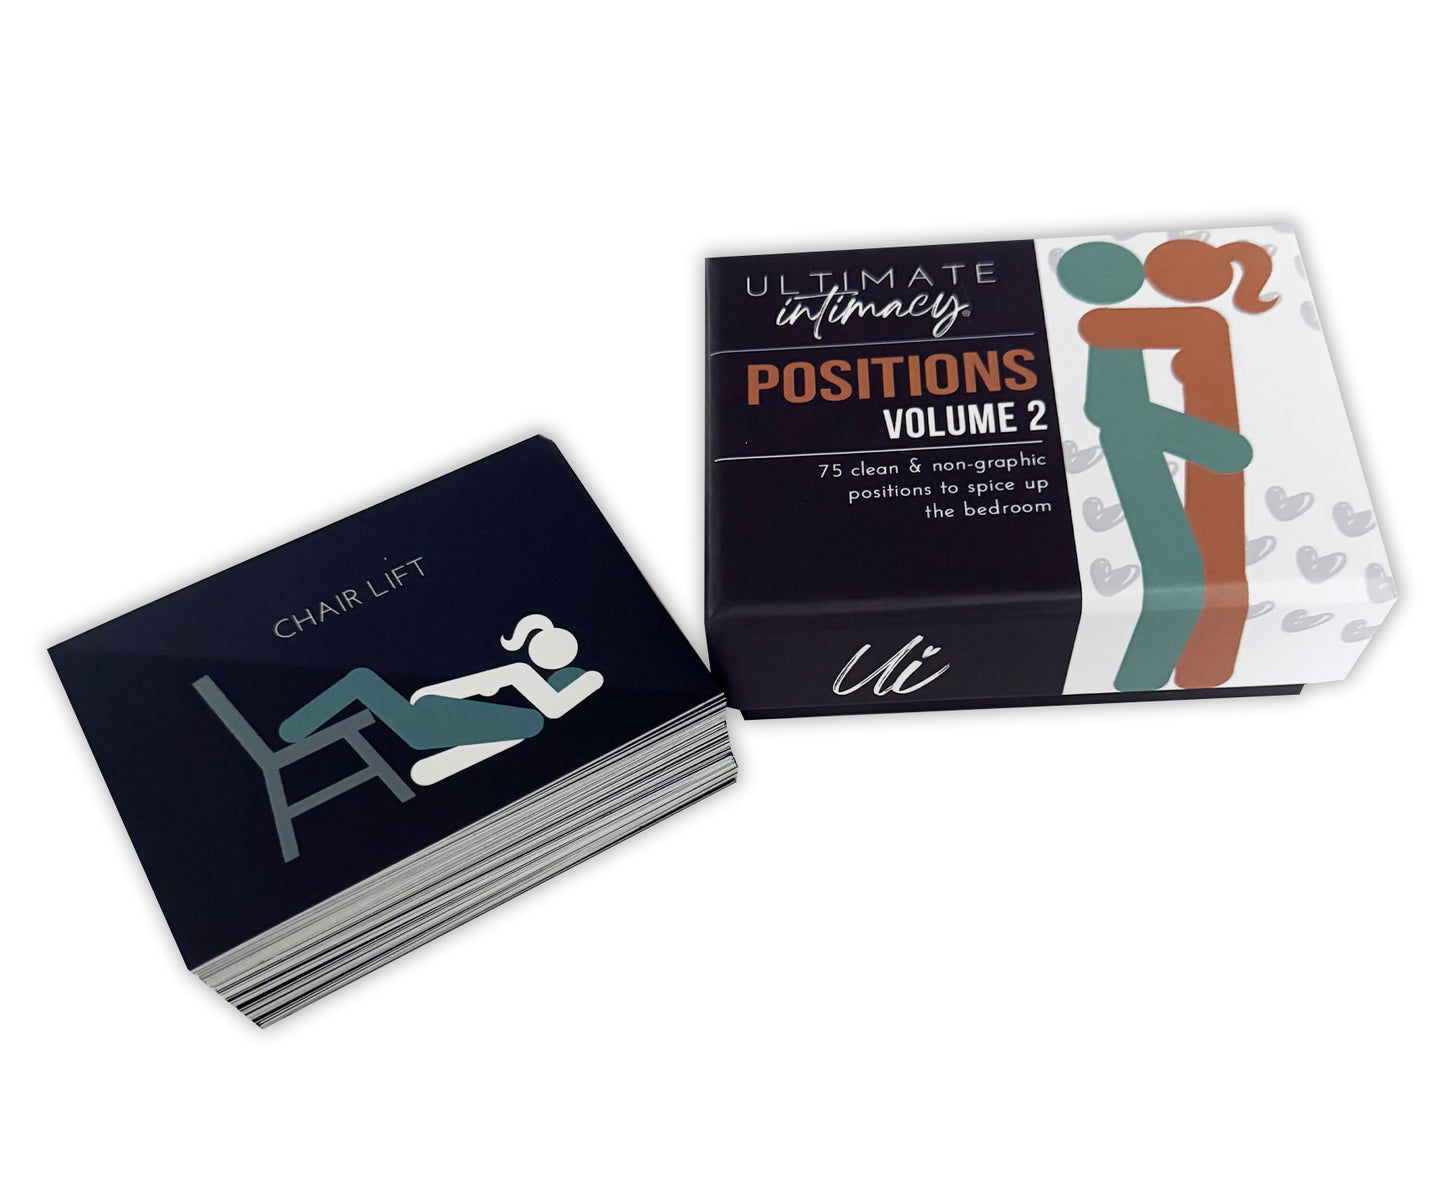 NEW - Sex Position Card Deck Volume 2,  Non-Graphic with 75 sex positions and descriptions